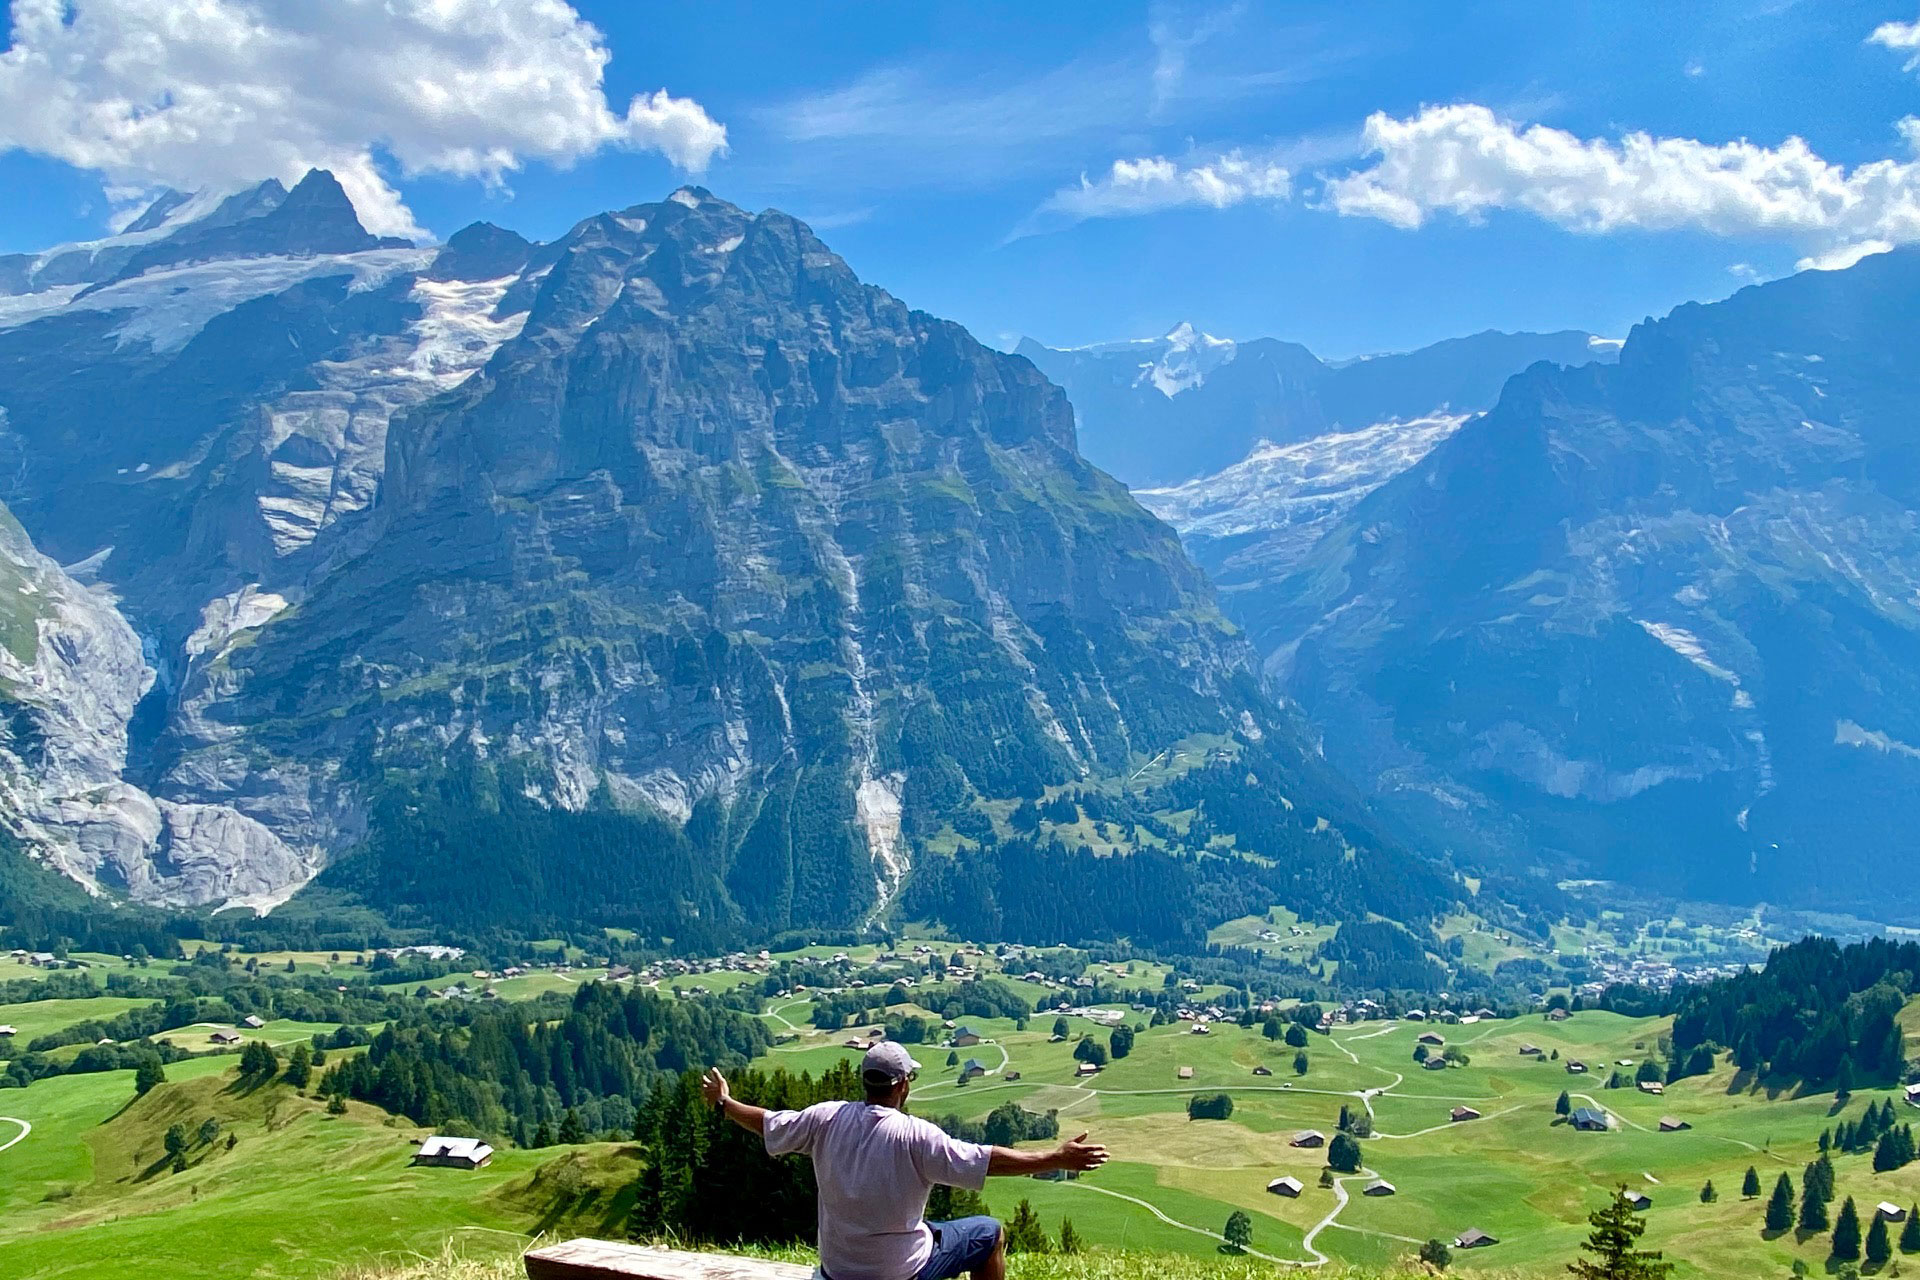 Best of Bernese Alps Private Day Tour: Visit of Lauterbrunnen, Mürren, Grindelwald, Interlaken in the Jungfrau Region (View on Eiger, Mönch and Jungfrau) (from Basel)